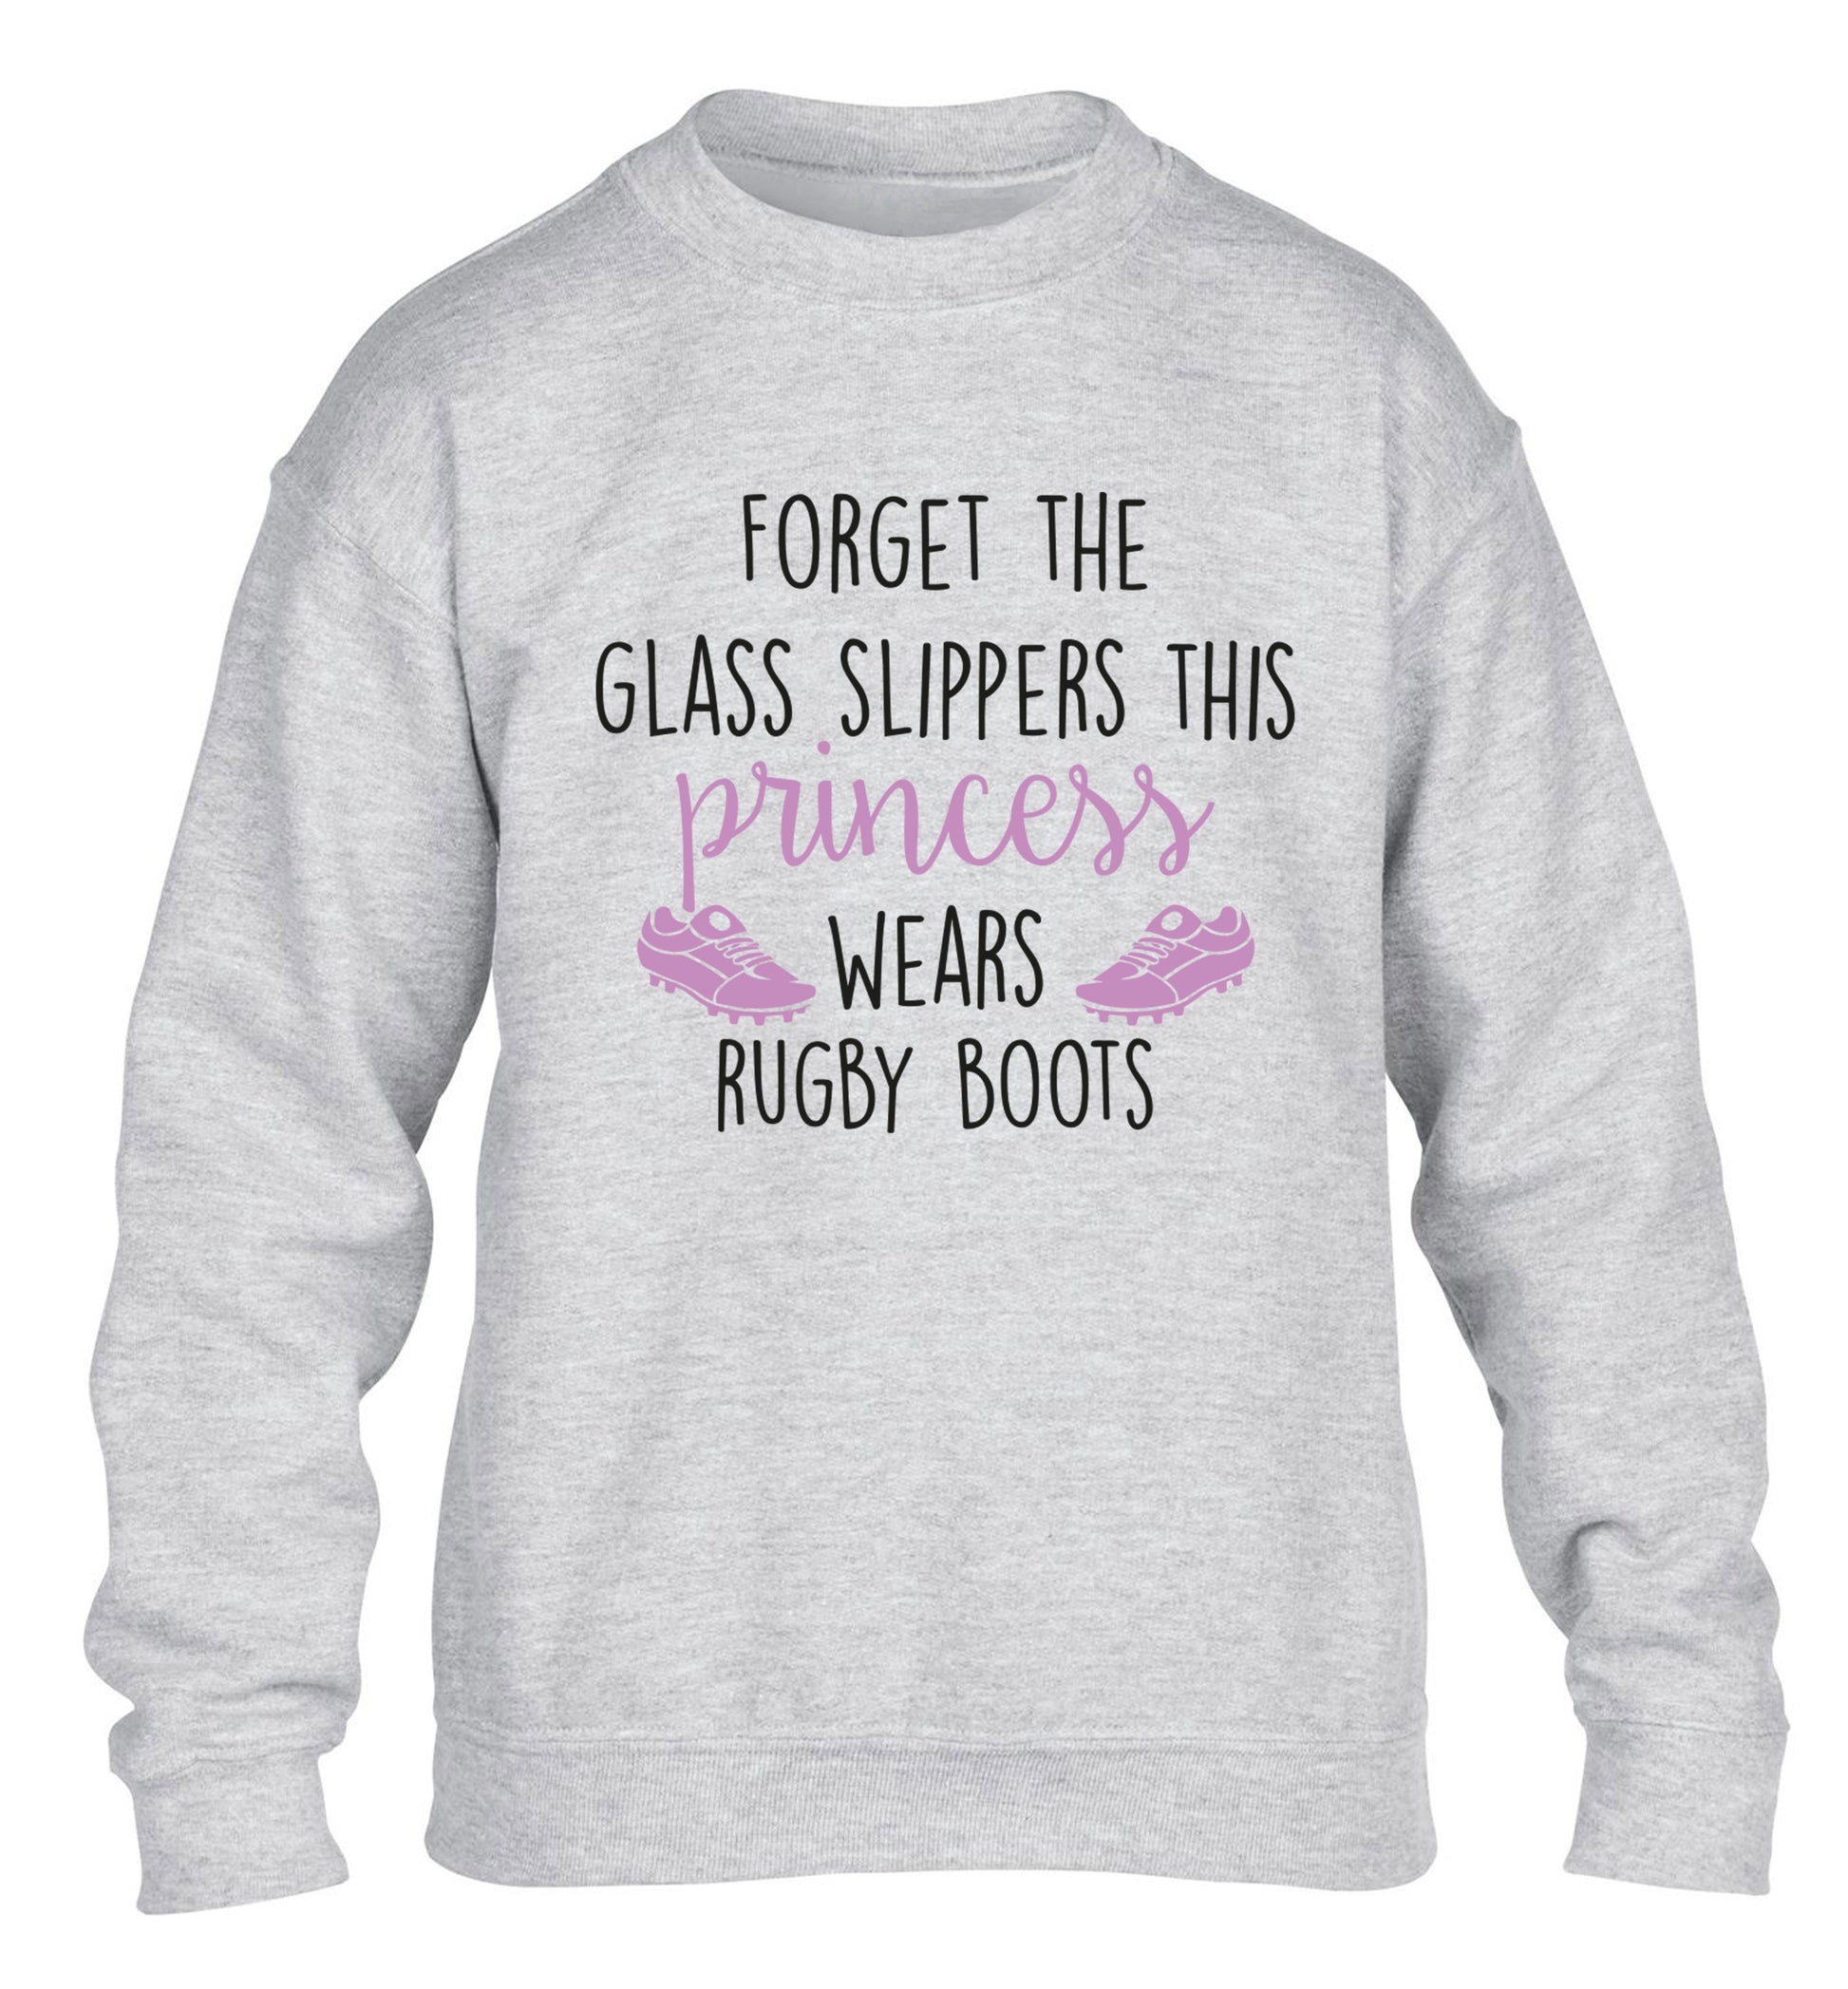 Forget the glass slippers this princess wears rugby boots children's grey sweater 12-14 Years